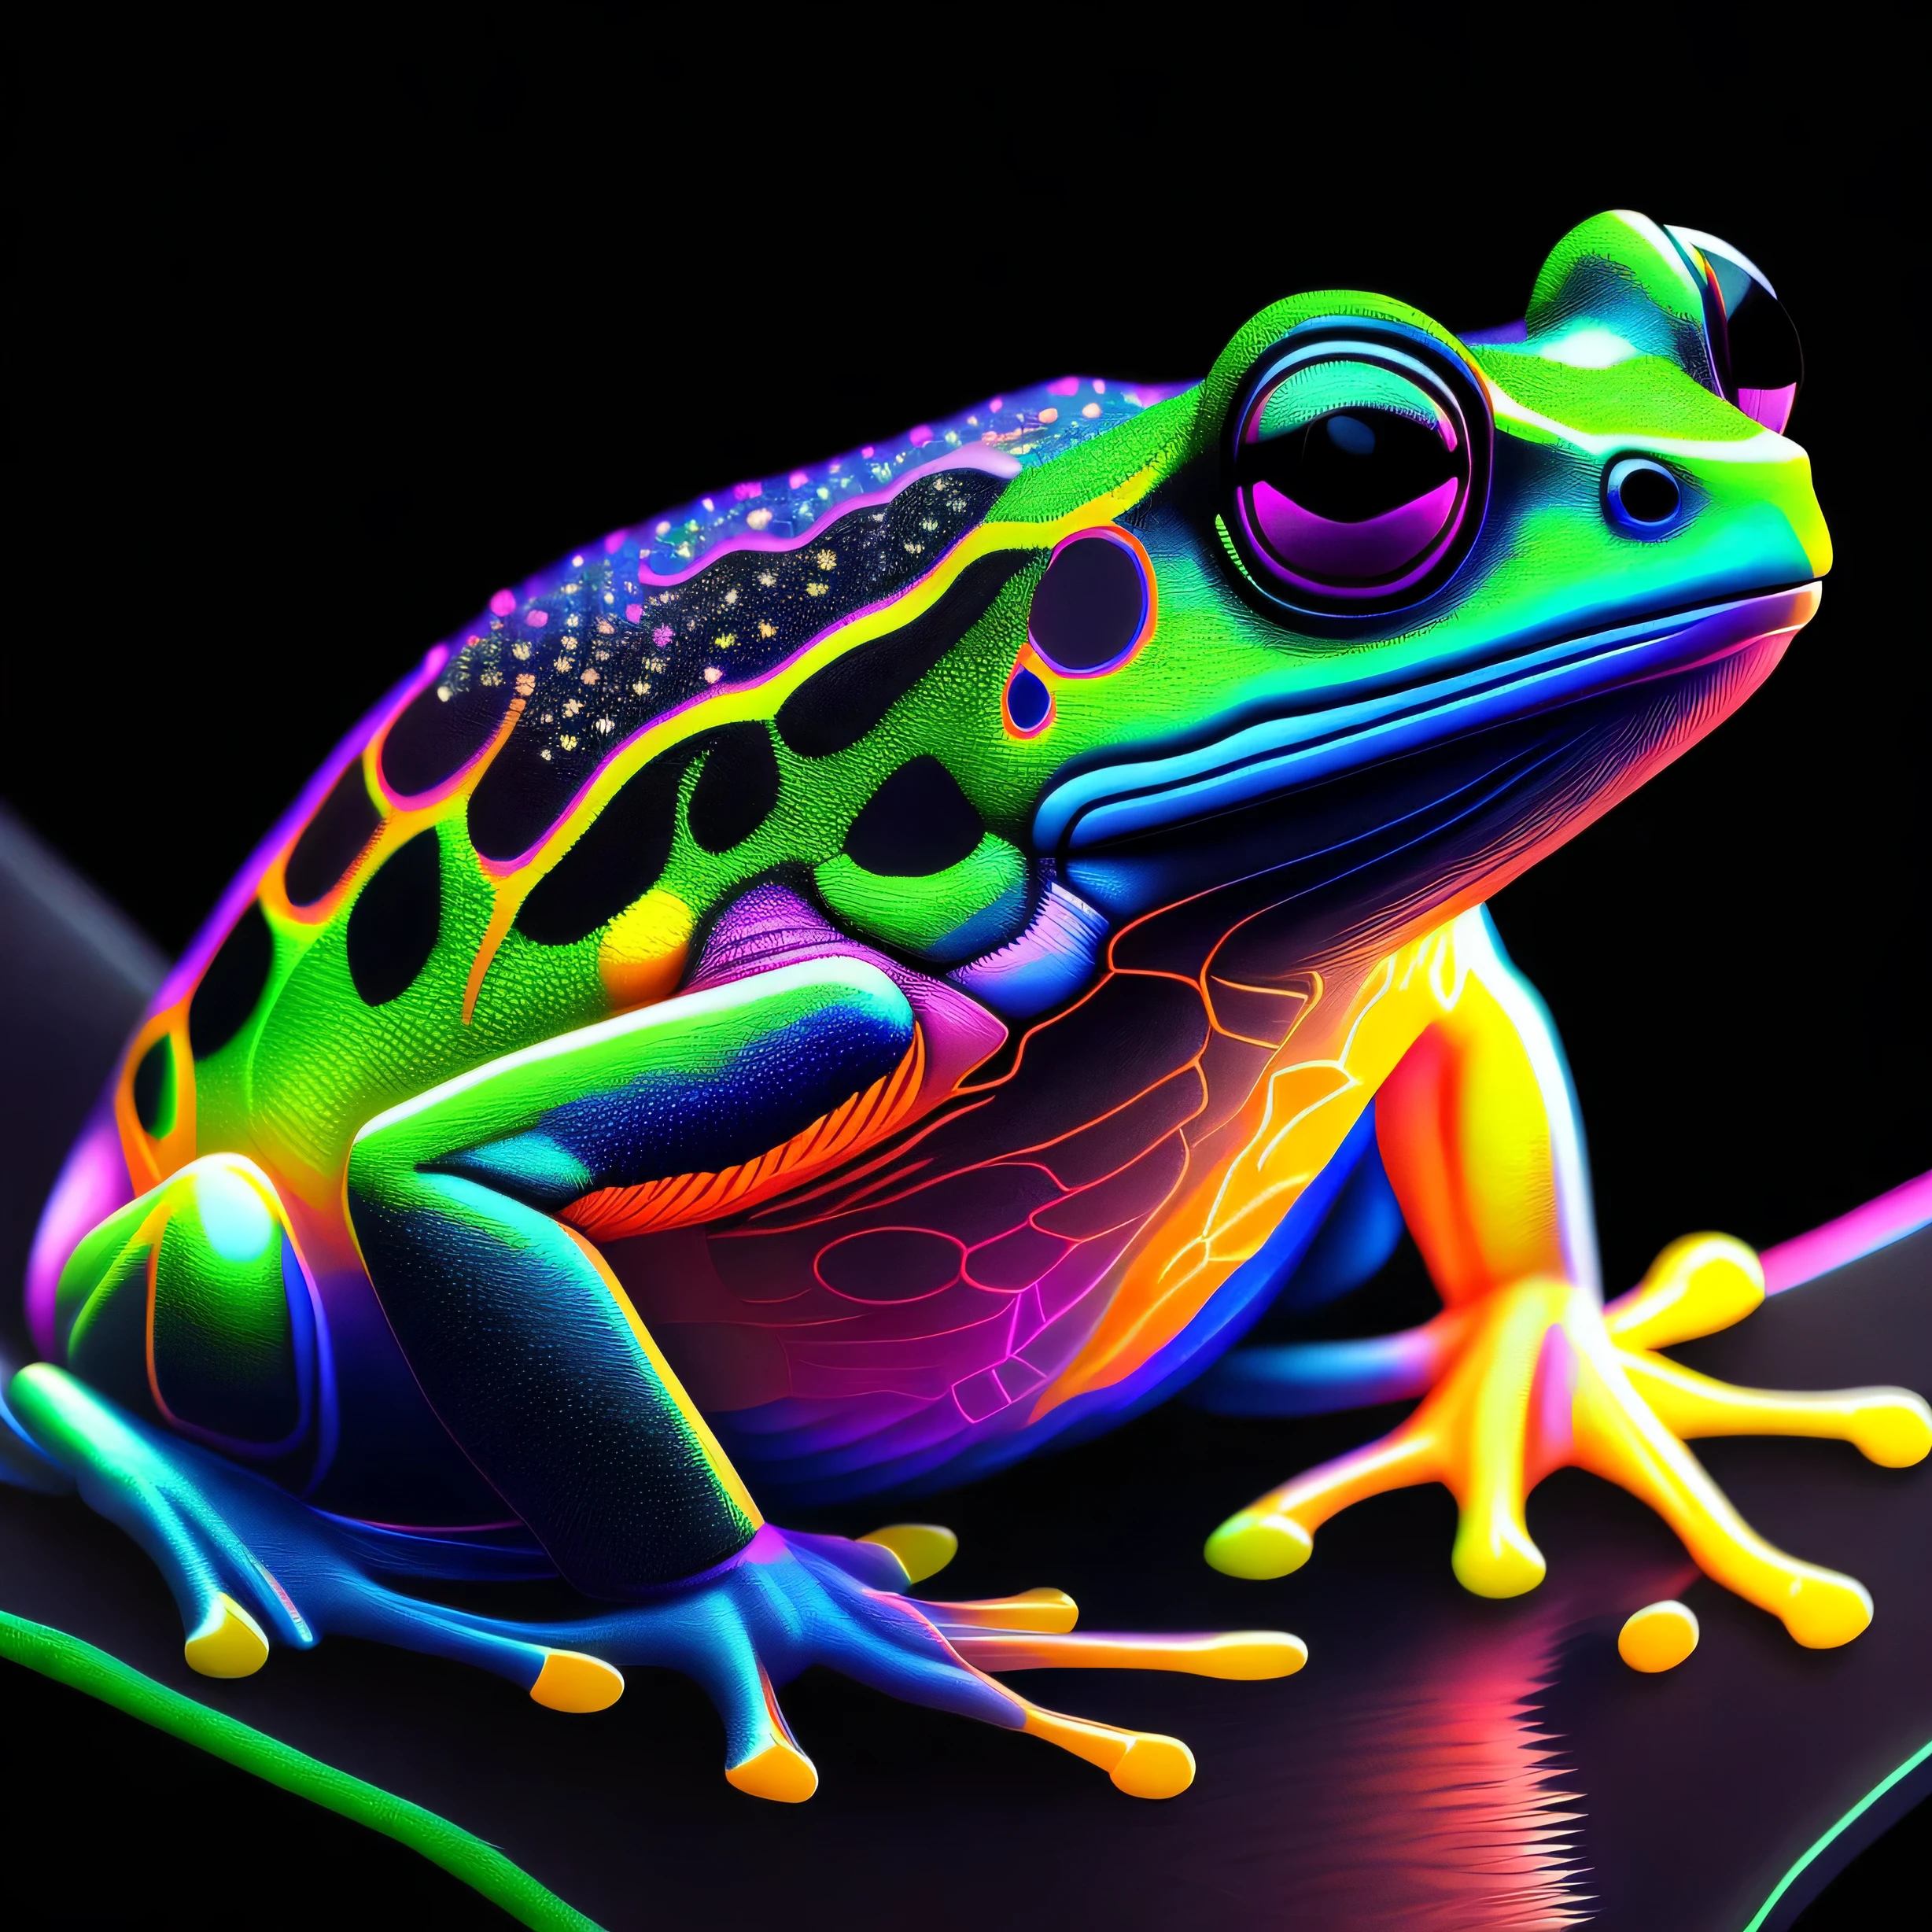 A realistic frog, 1.5 colorful, vibrant, by